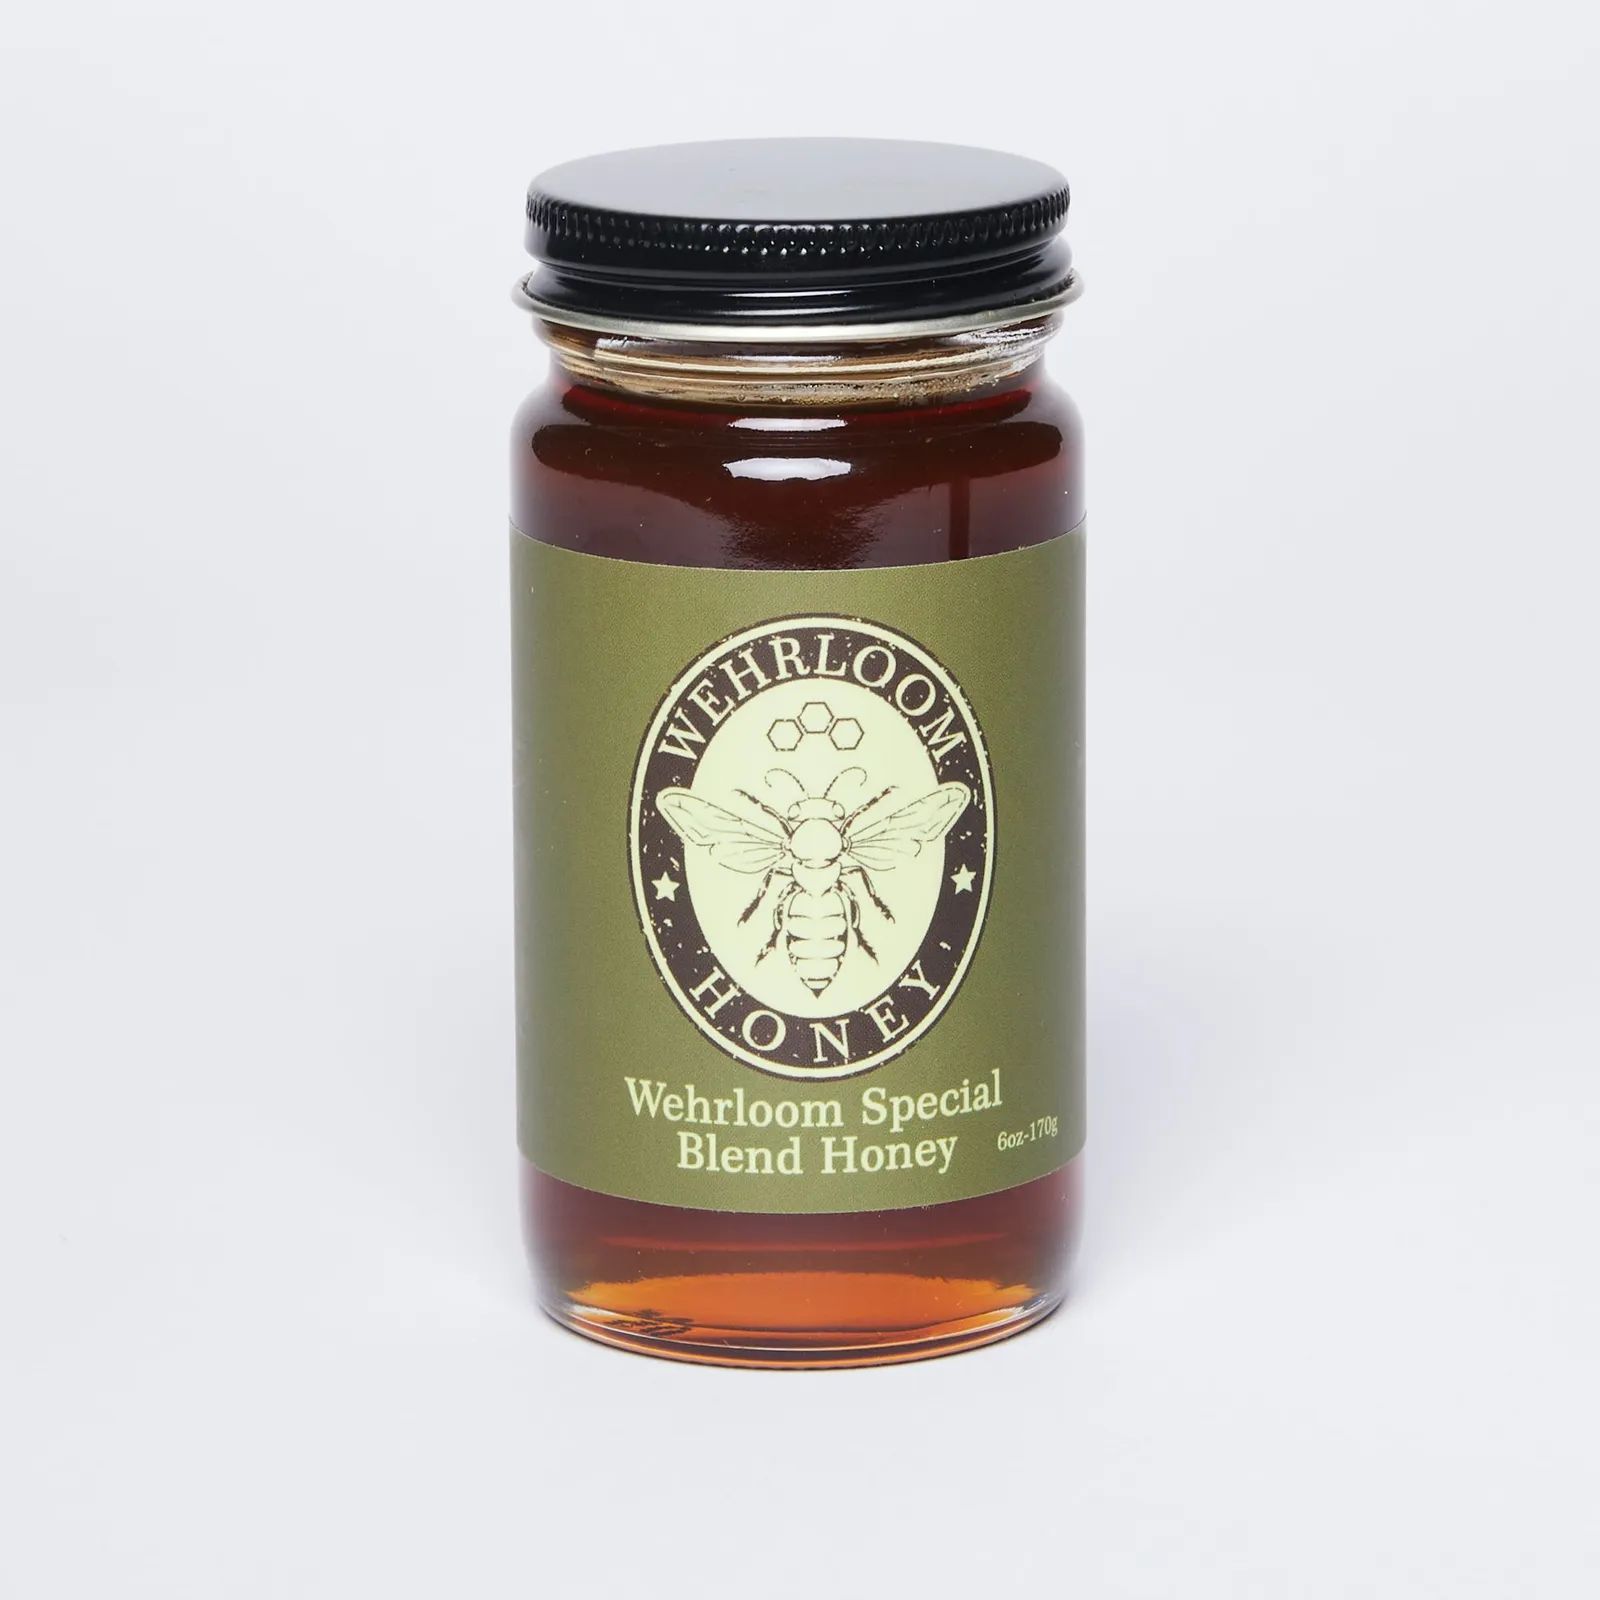 A jar of honey with a green label with a honeybee illustration 